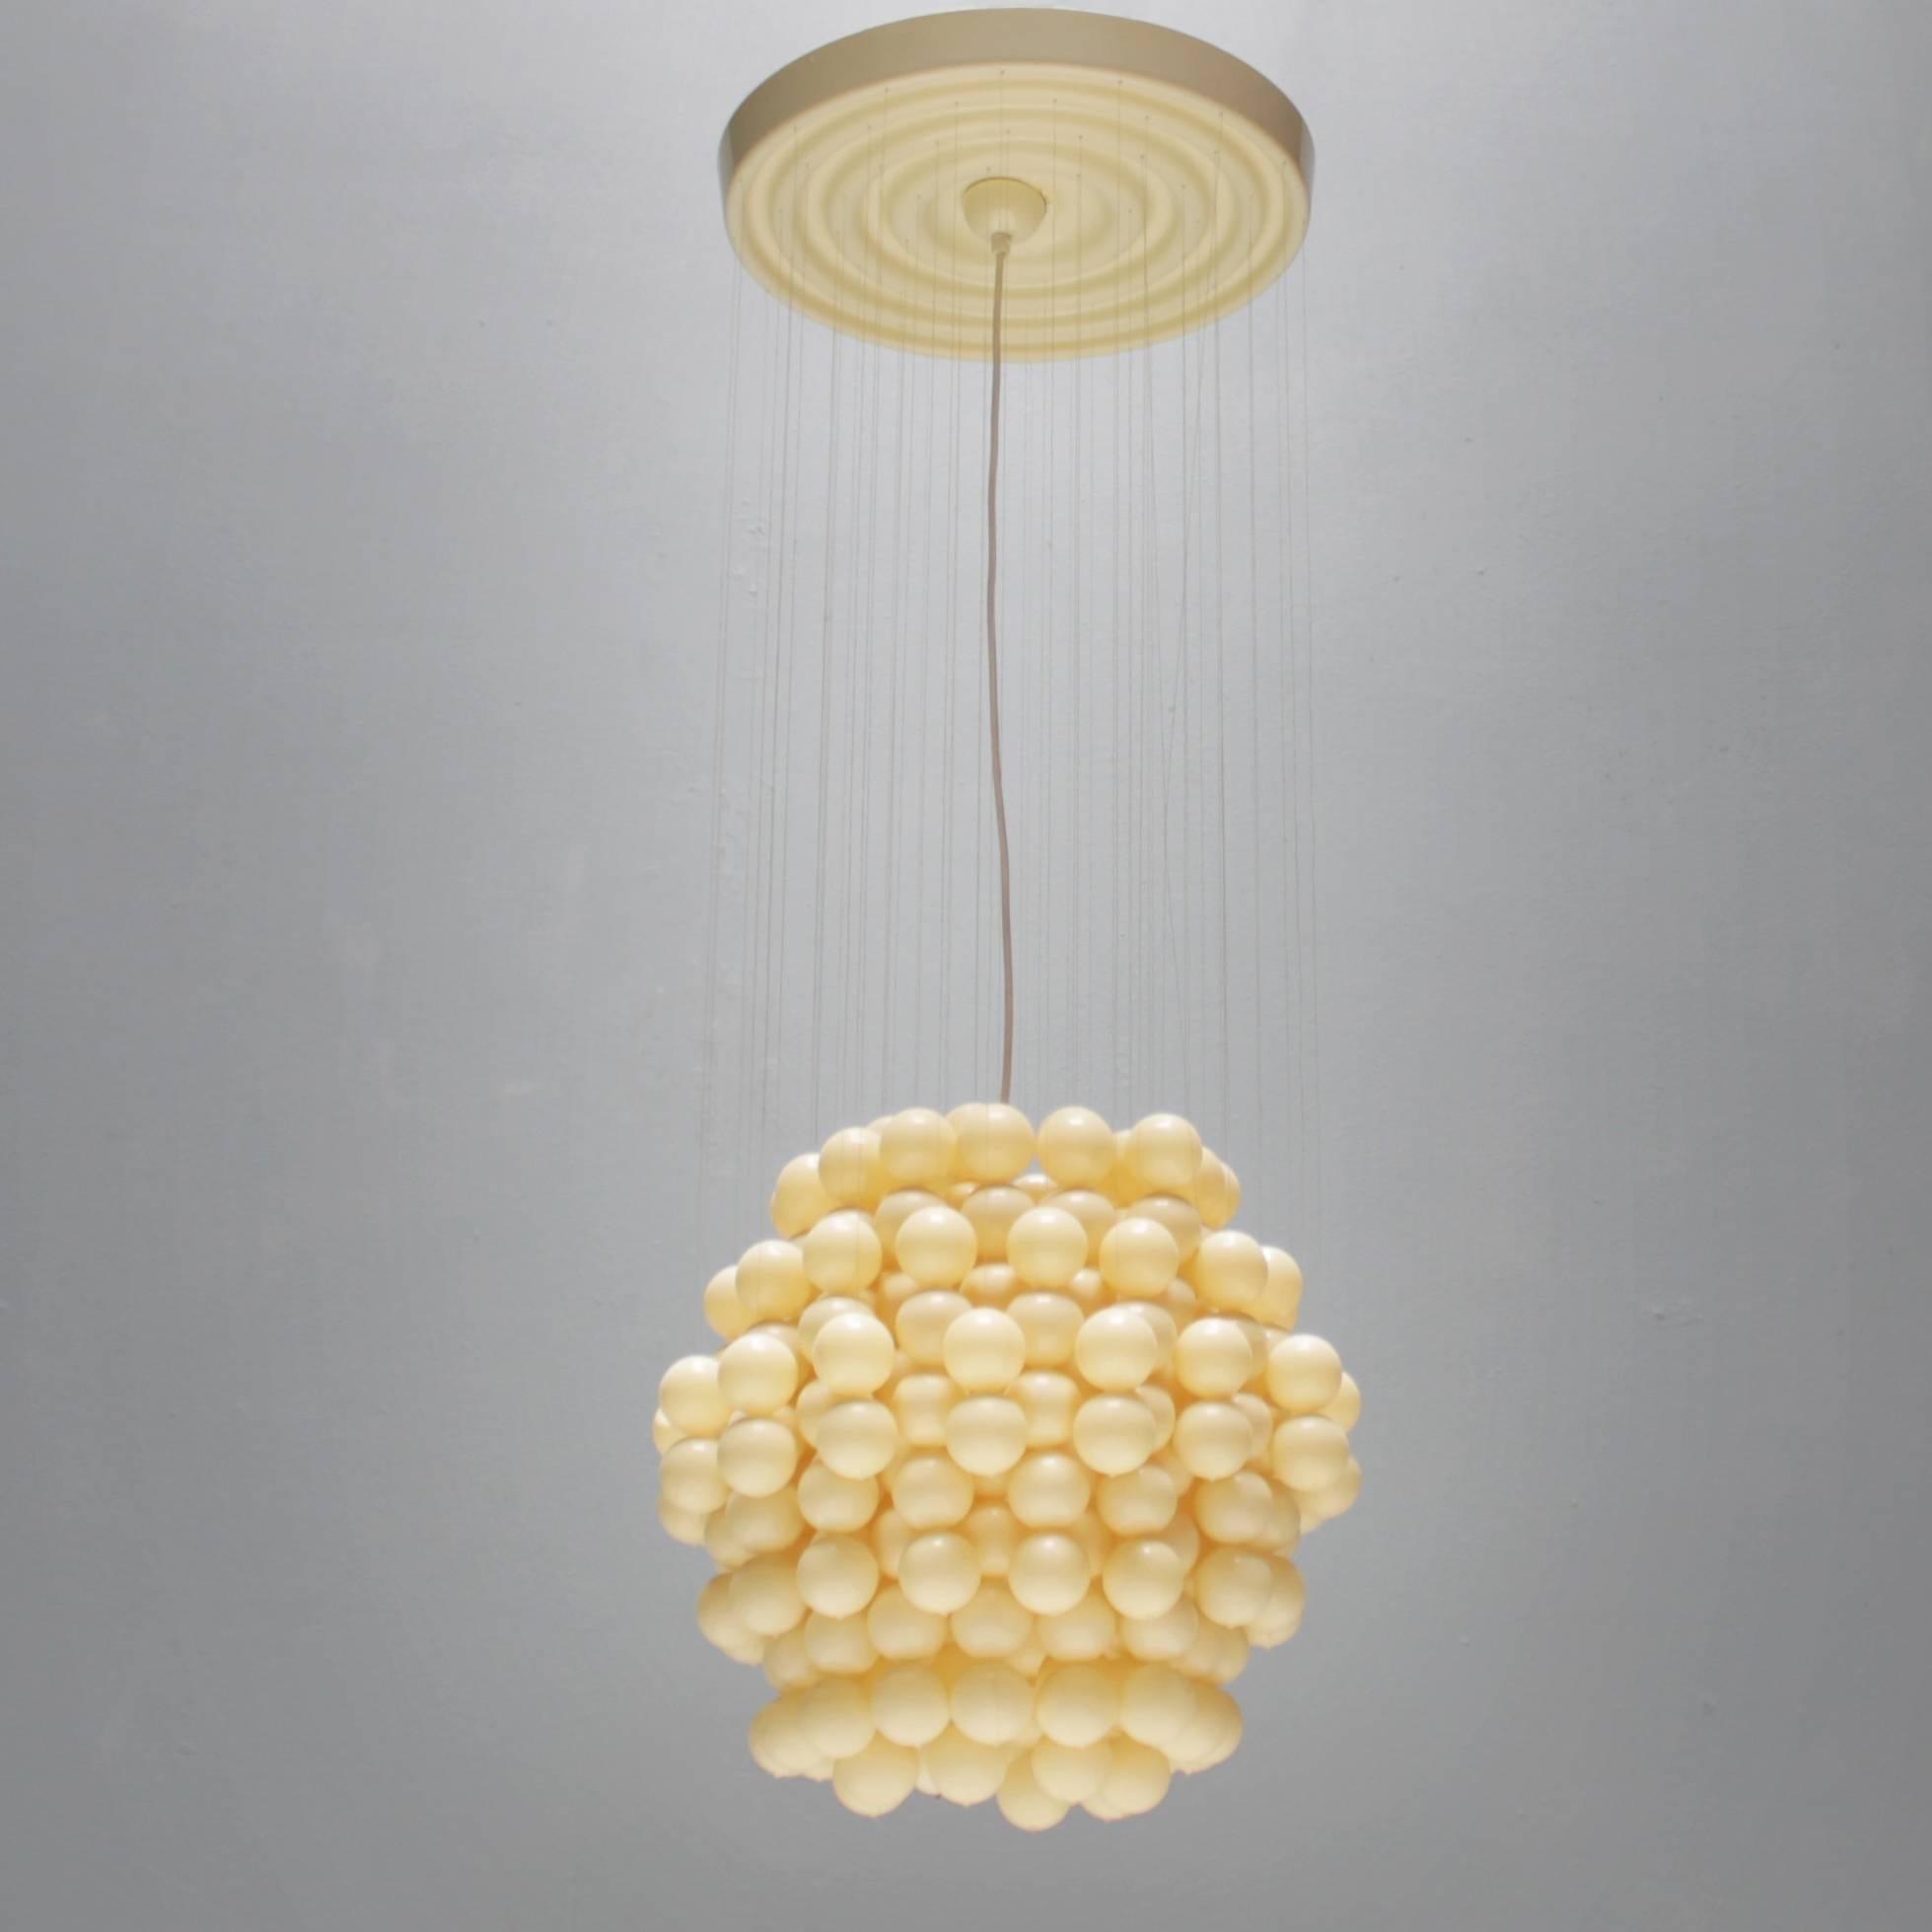 Very rare original 'Kugel-Lamp or Ball Lamp', model: TYP F by the Danish designer Verner Panton. Serial production model in context of Visiona 2, Cologne Furniture Fair, 1970. Design: 1969, production: 1970. White ceiling plate, attached with nylon